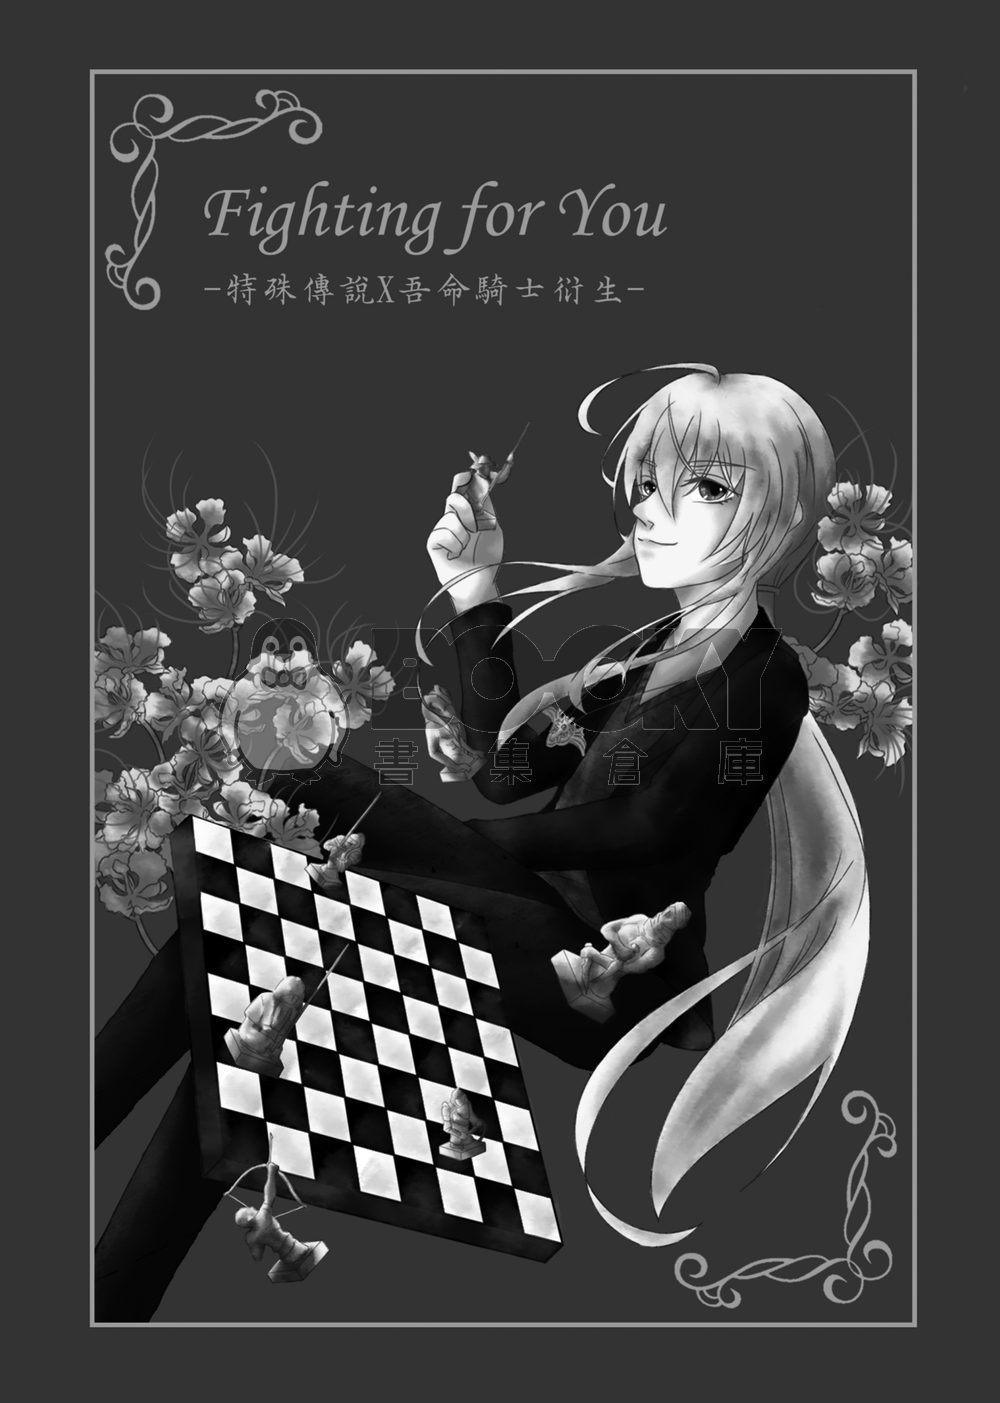 Fighting for You 試閱圖片